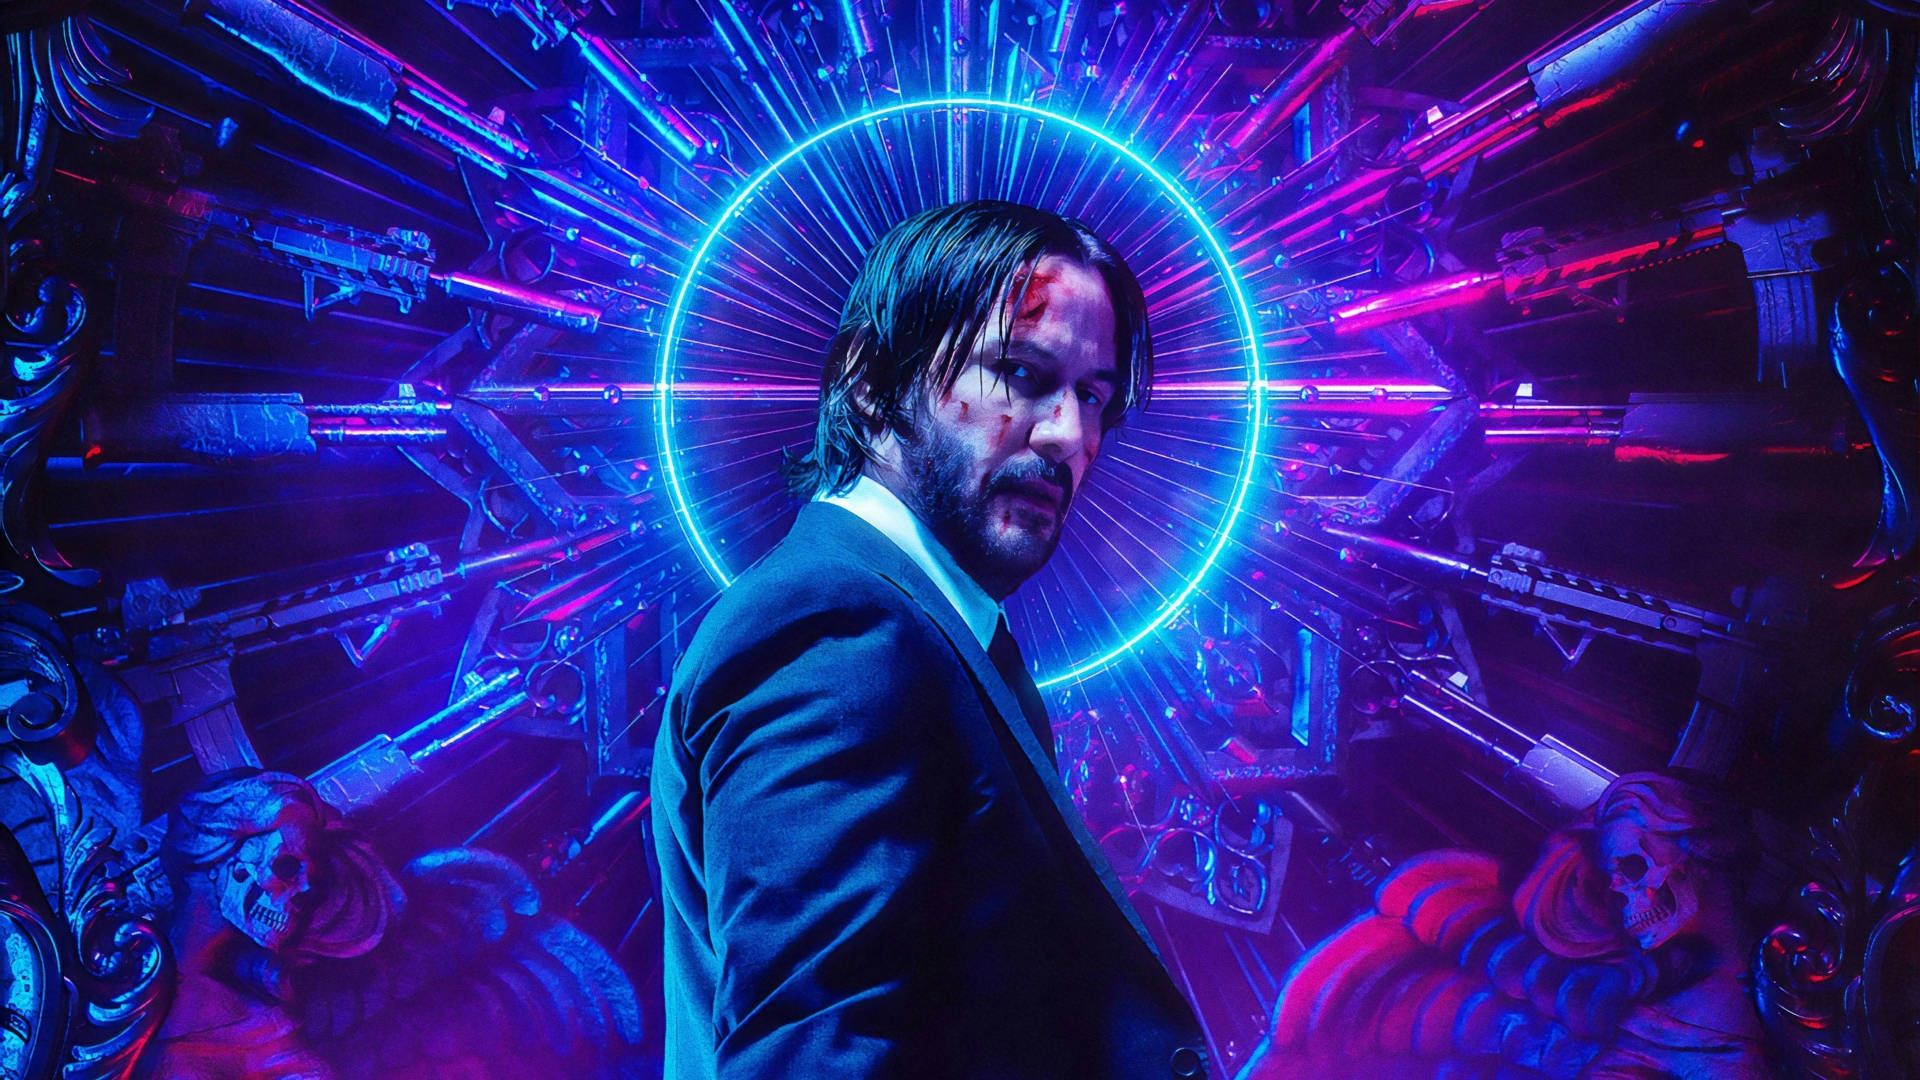 John Wick Chapter 3 Parabellum Review John Wick 3 Is A Fast Paced Action Filled Film That Continues The Franchise S Winning Formula Of Being A Masterpiece In The Action Genre John Wick 3 Is A Masterpiece In The Action Genre - John Wick